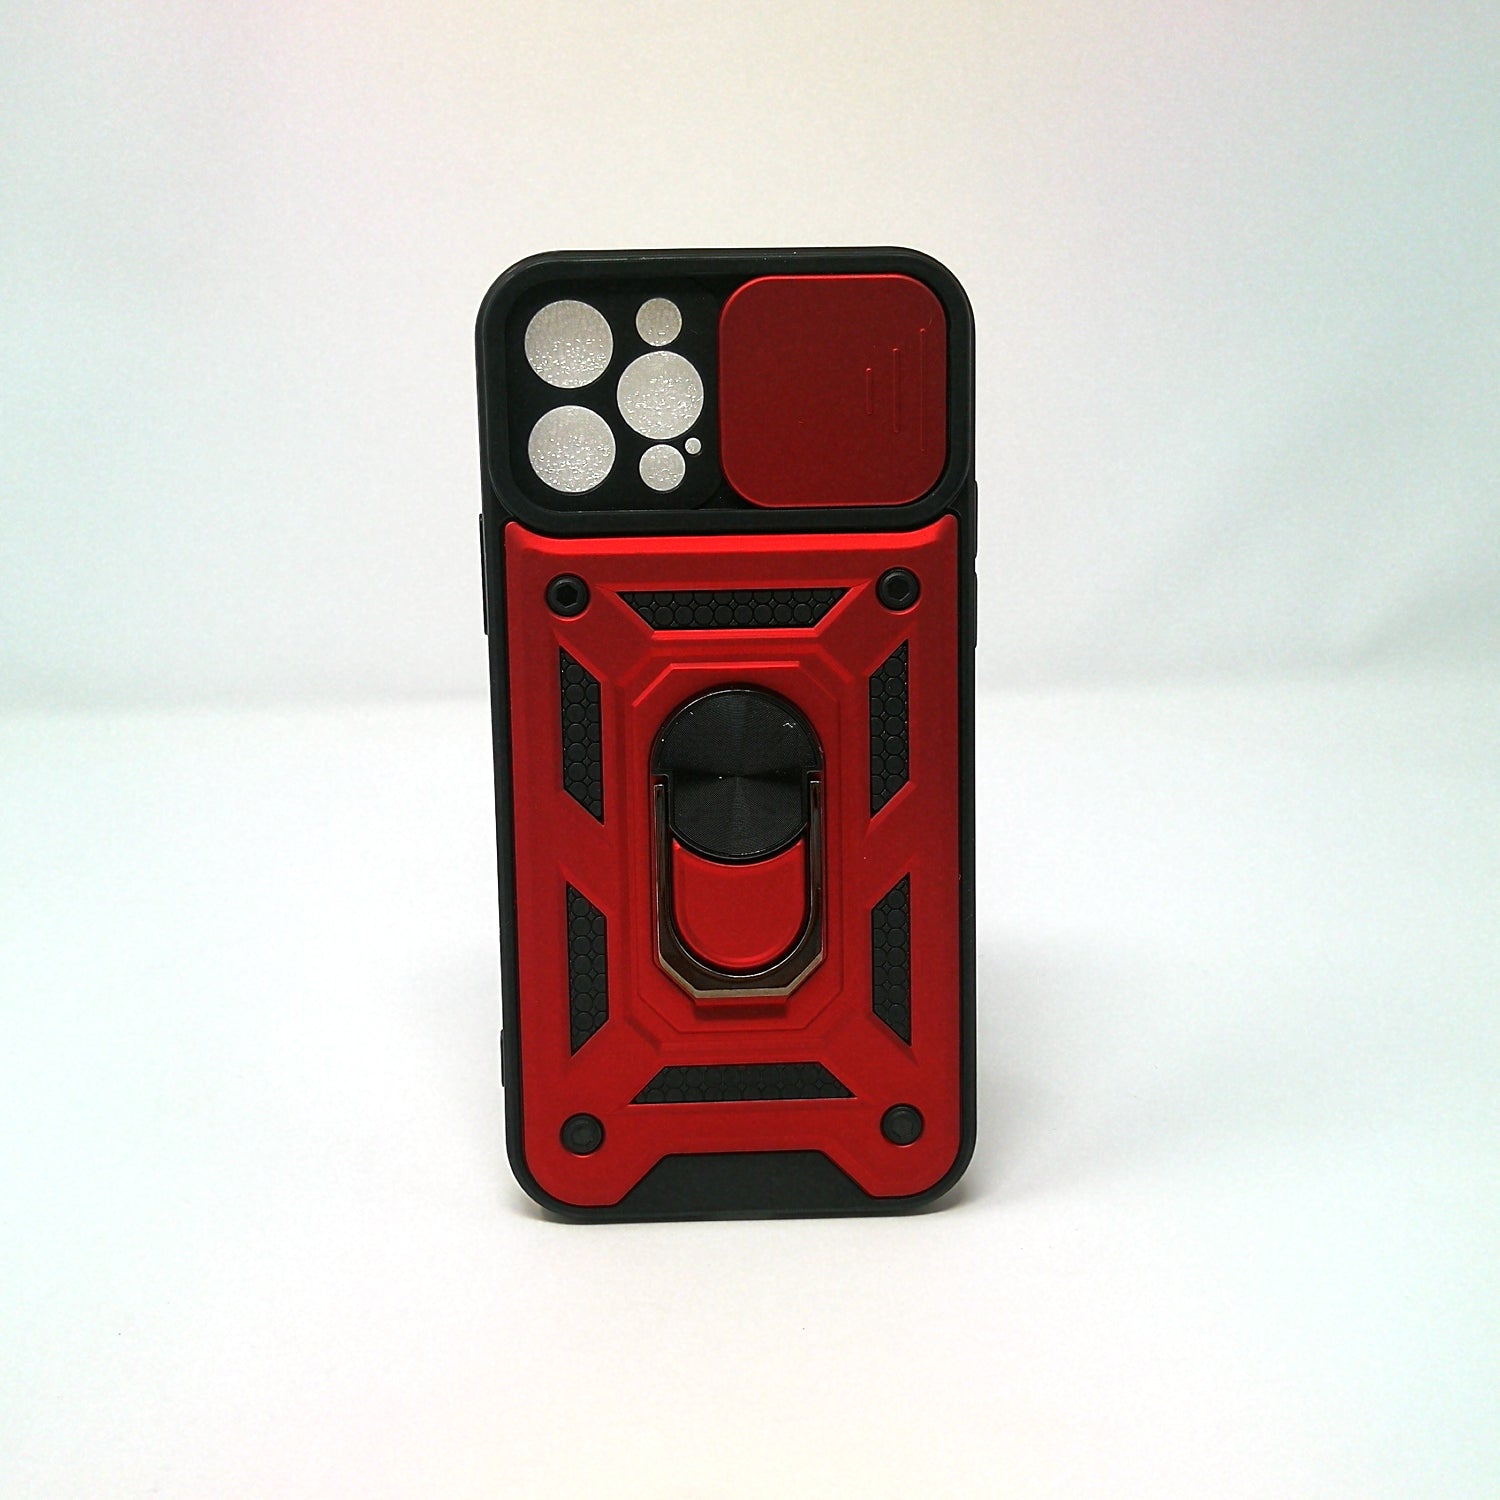 Apple iPhone 12 Pro Max - Undercover Shockproof Magnet Case with iRing Kickstand [Pro-M]